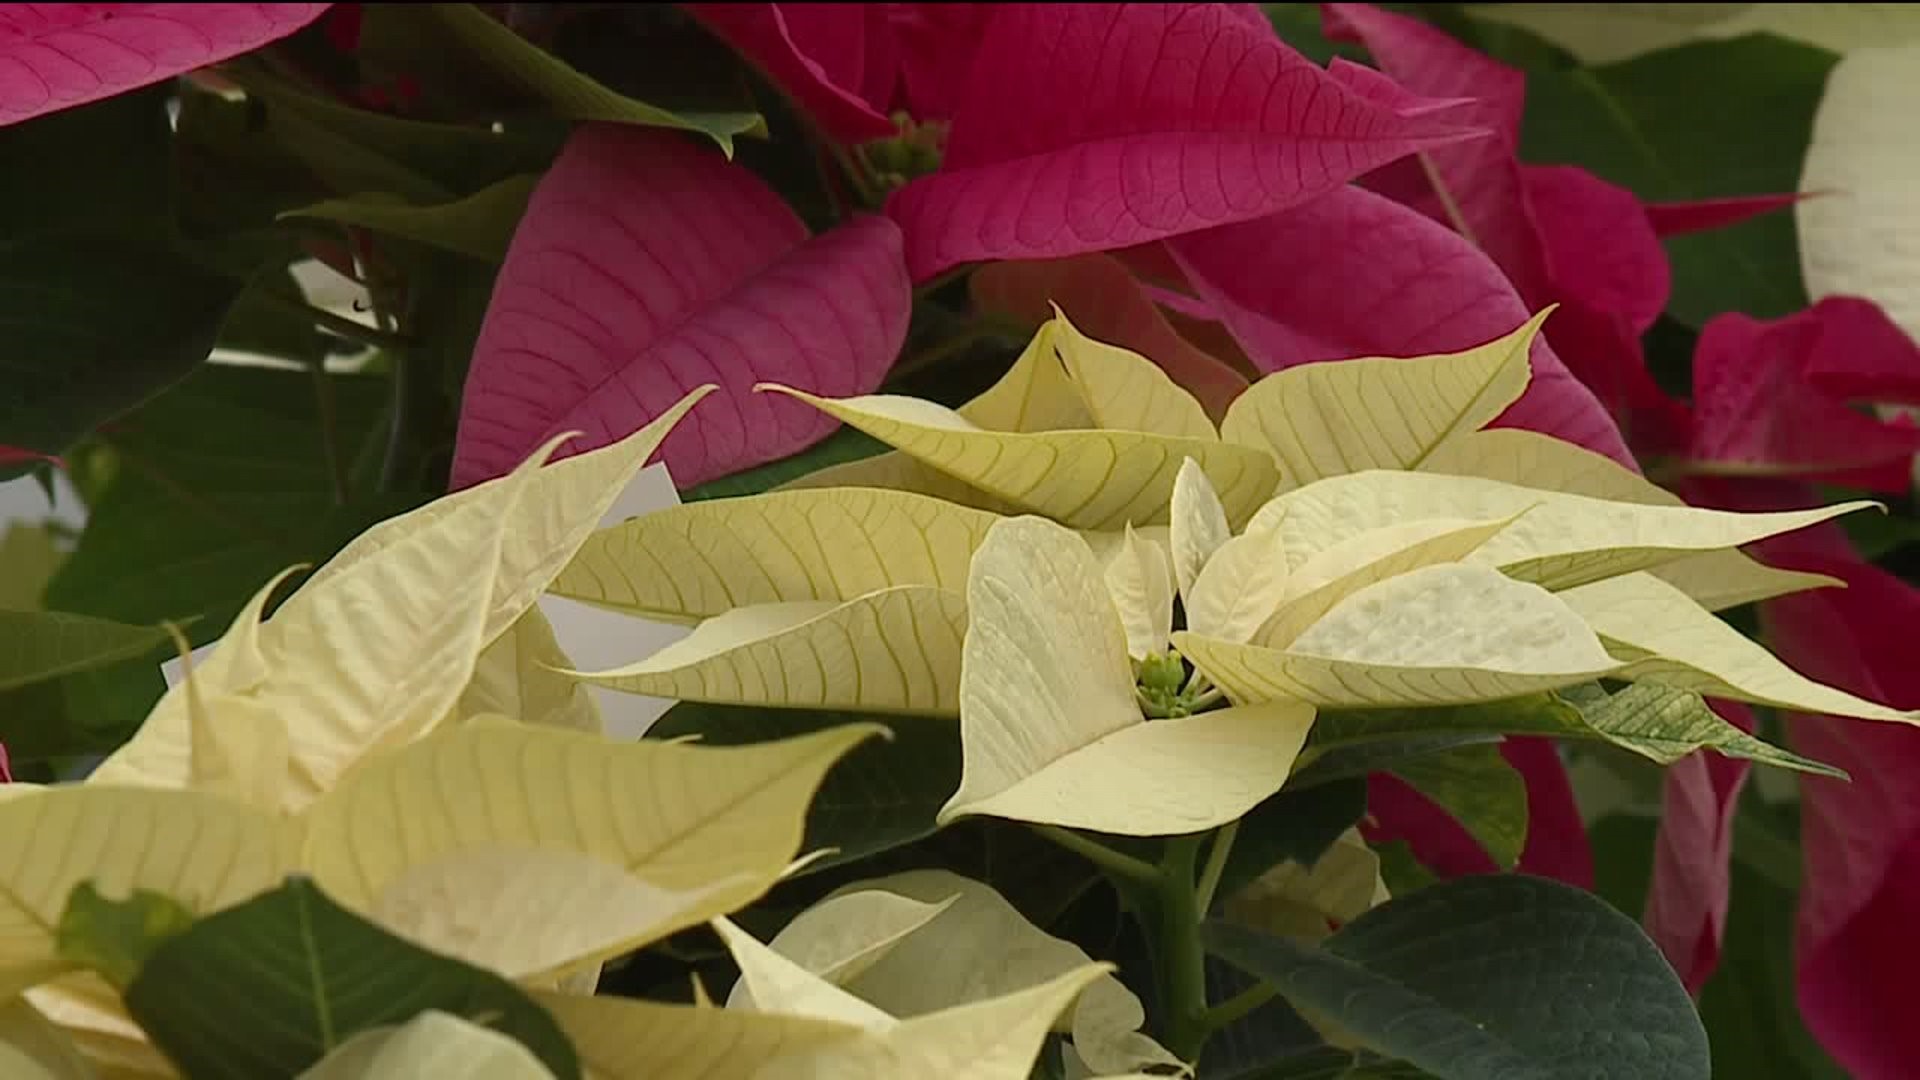 Greenhouse Project Selling Poinsettias and Wreaths